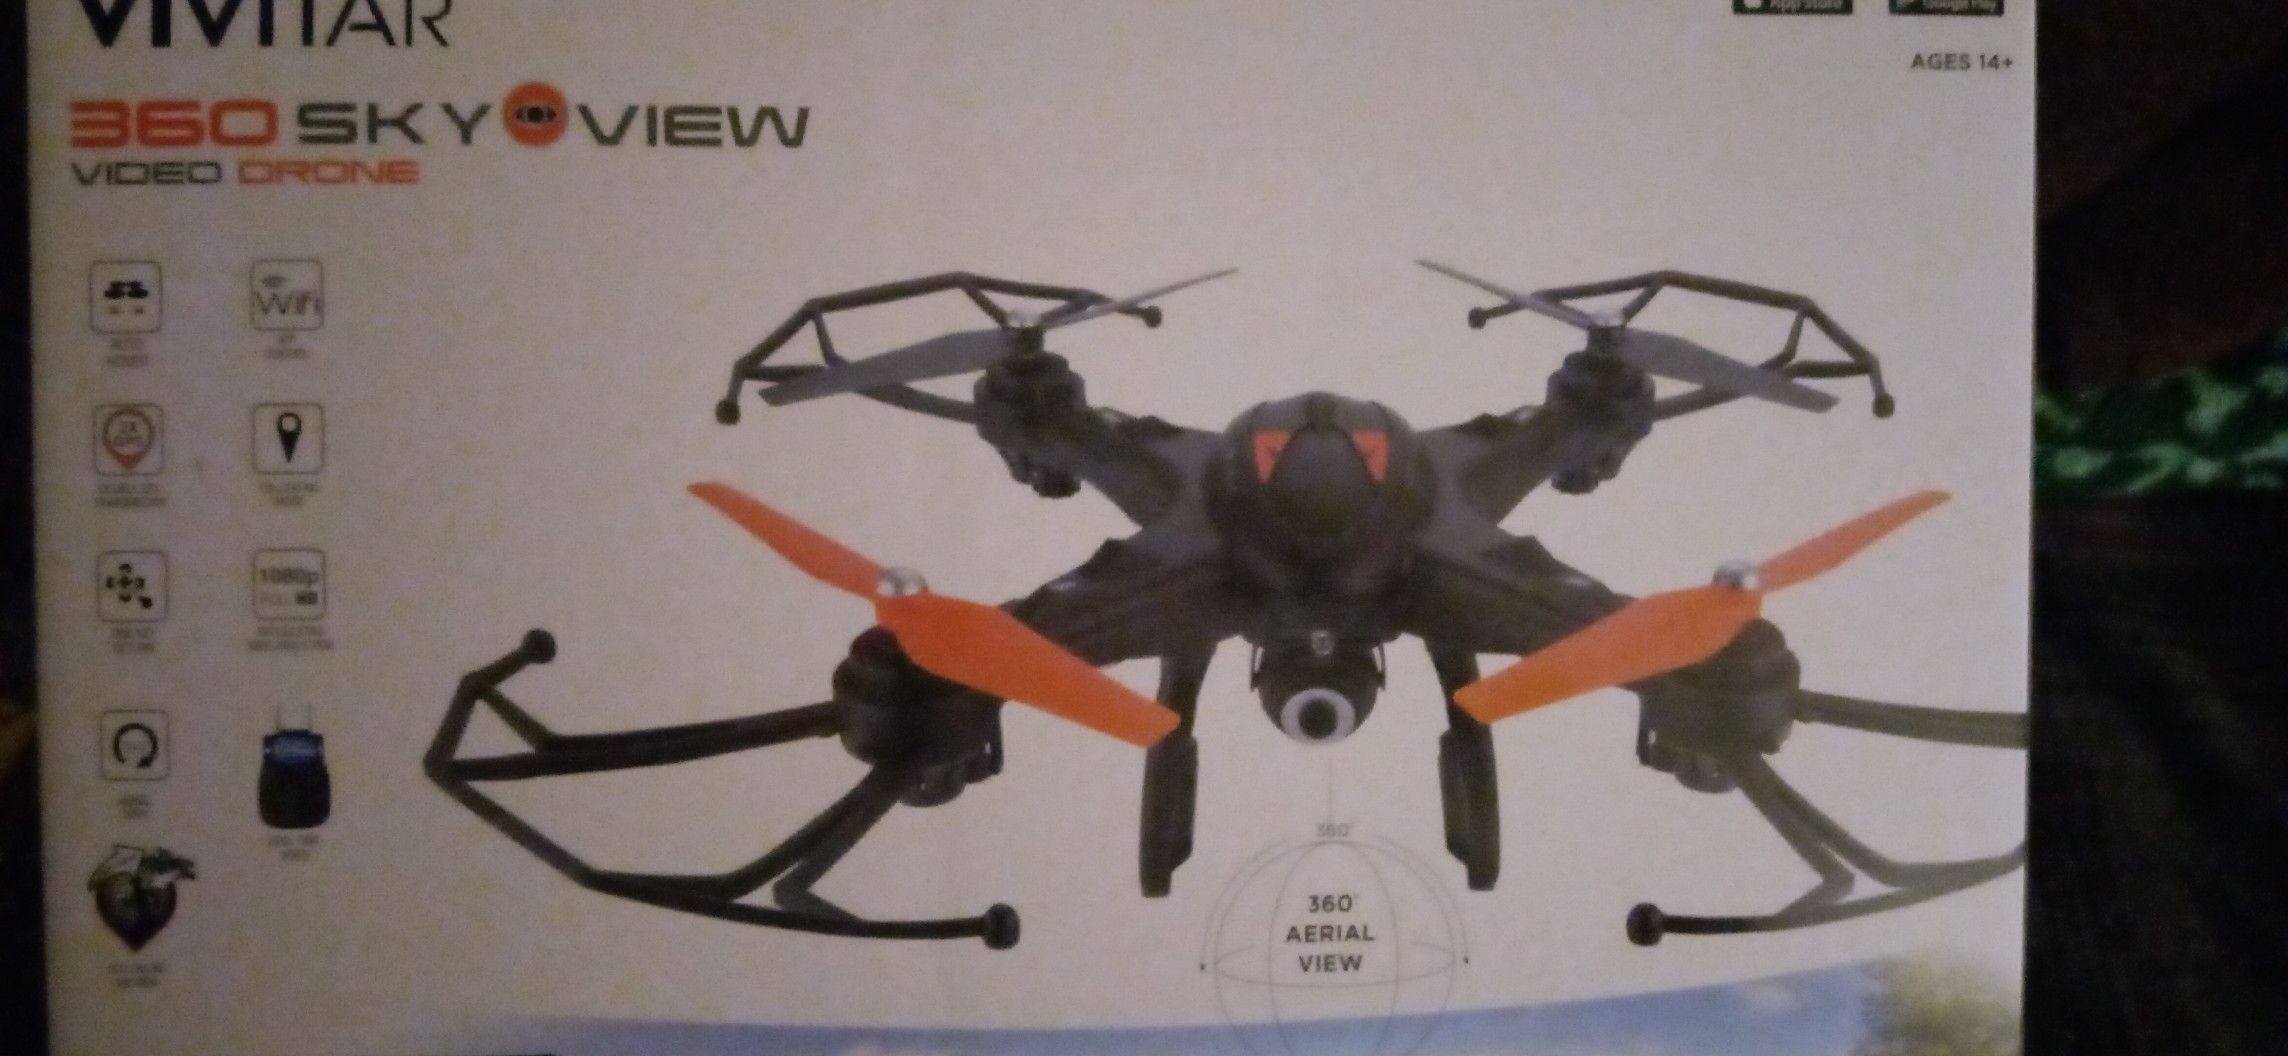 please allow a day for response. Vivitar Video Drone and Mini Cameras